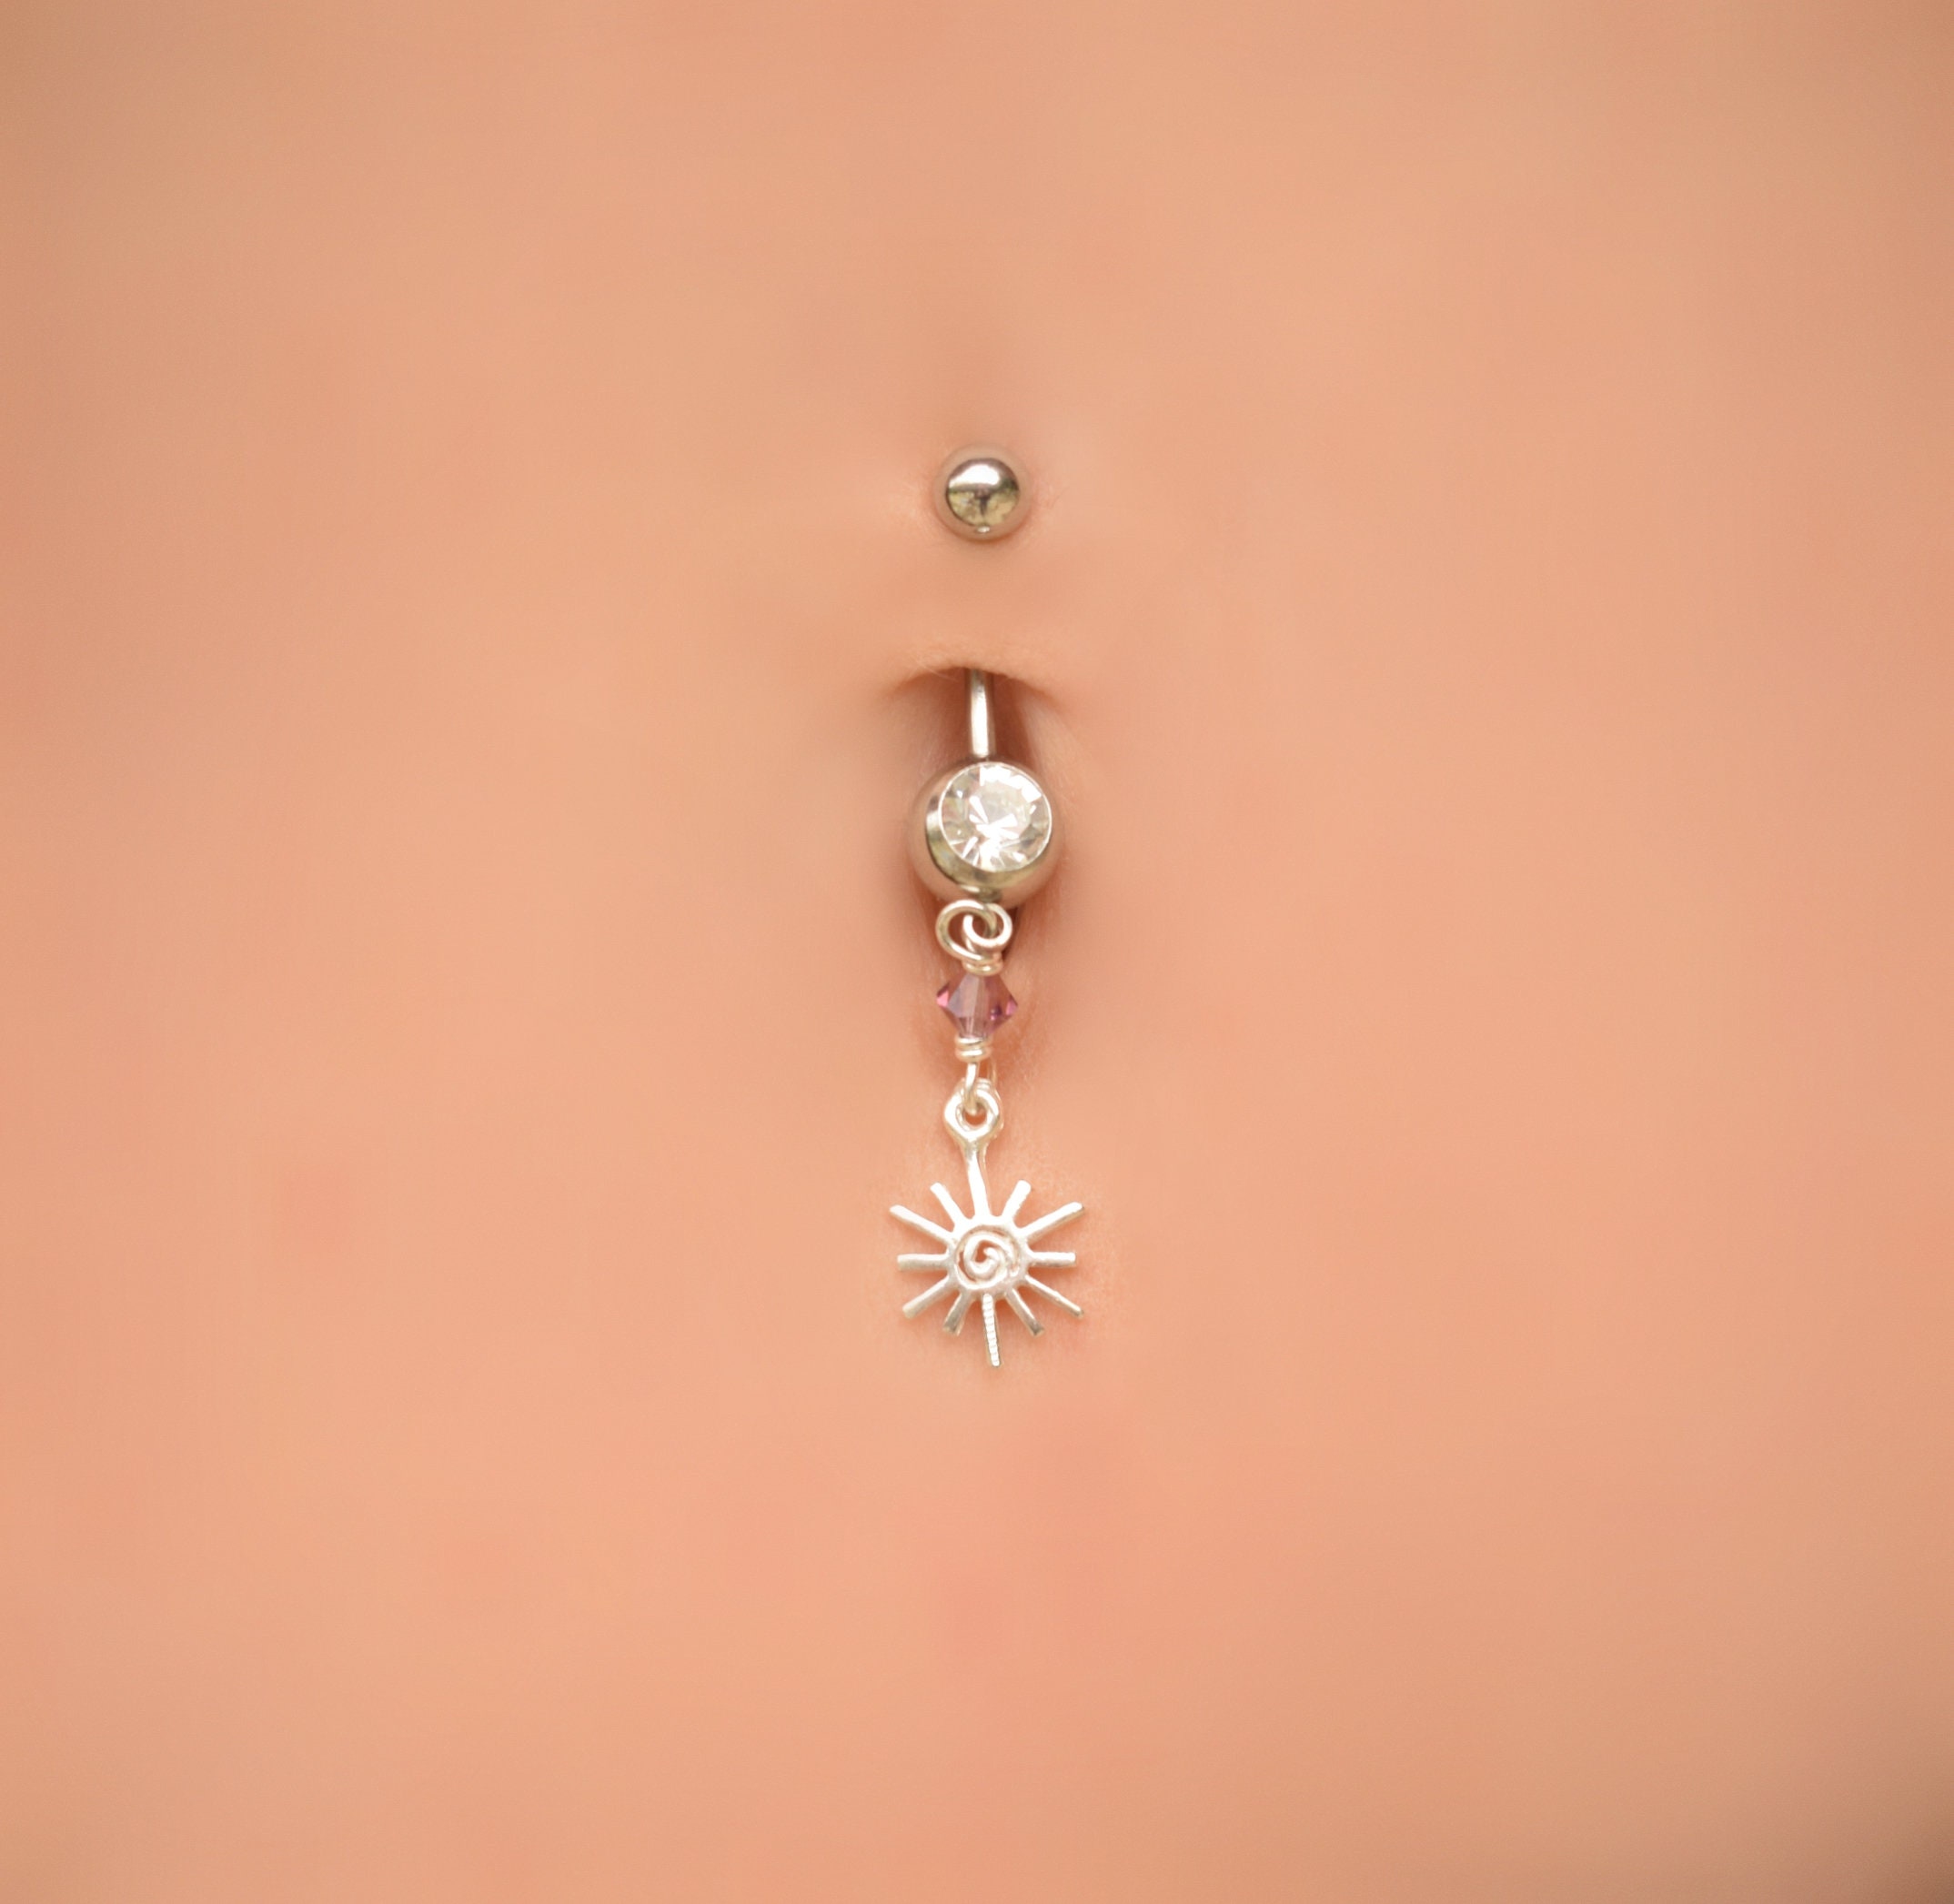  FLYUN Belly Button Ring,925 Sterling Silver Lunula